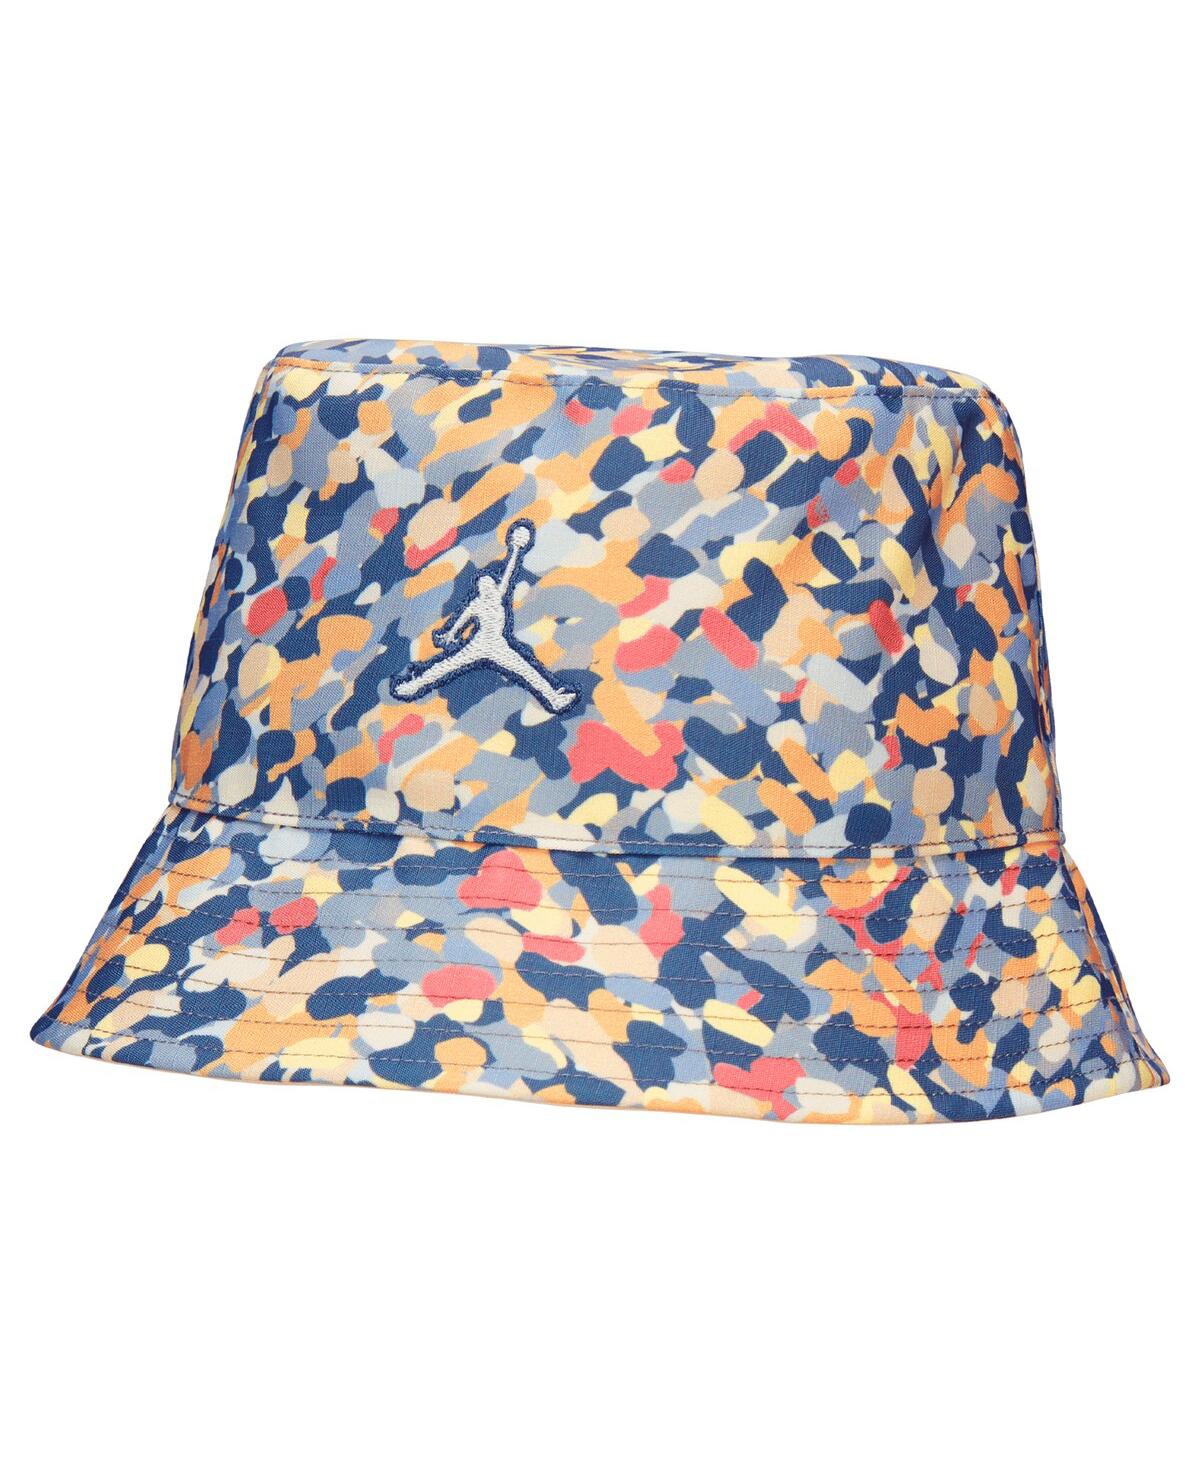 Men's and Women's Red Allover Print Reversible Bucket Hat - Red